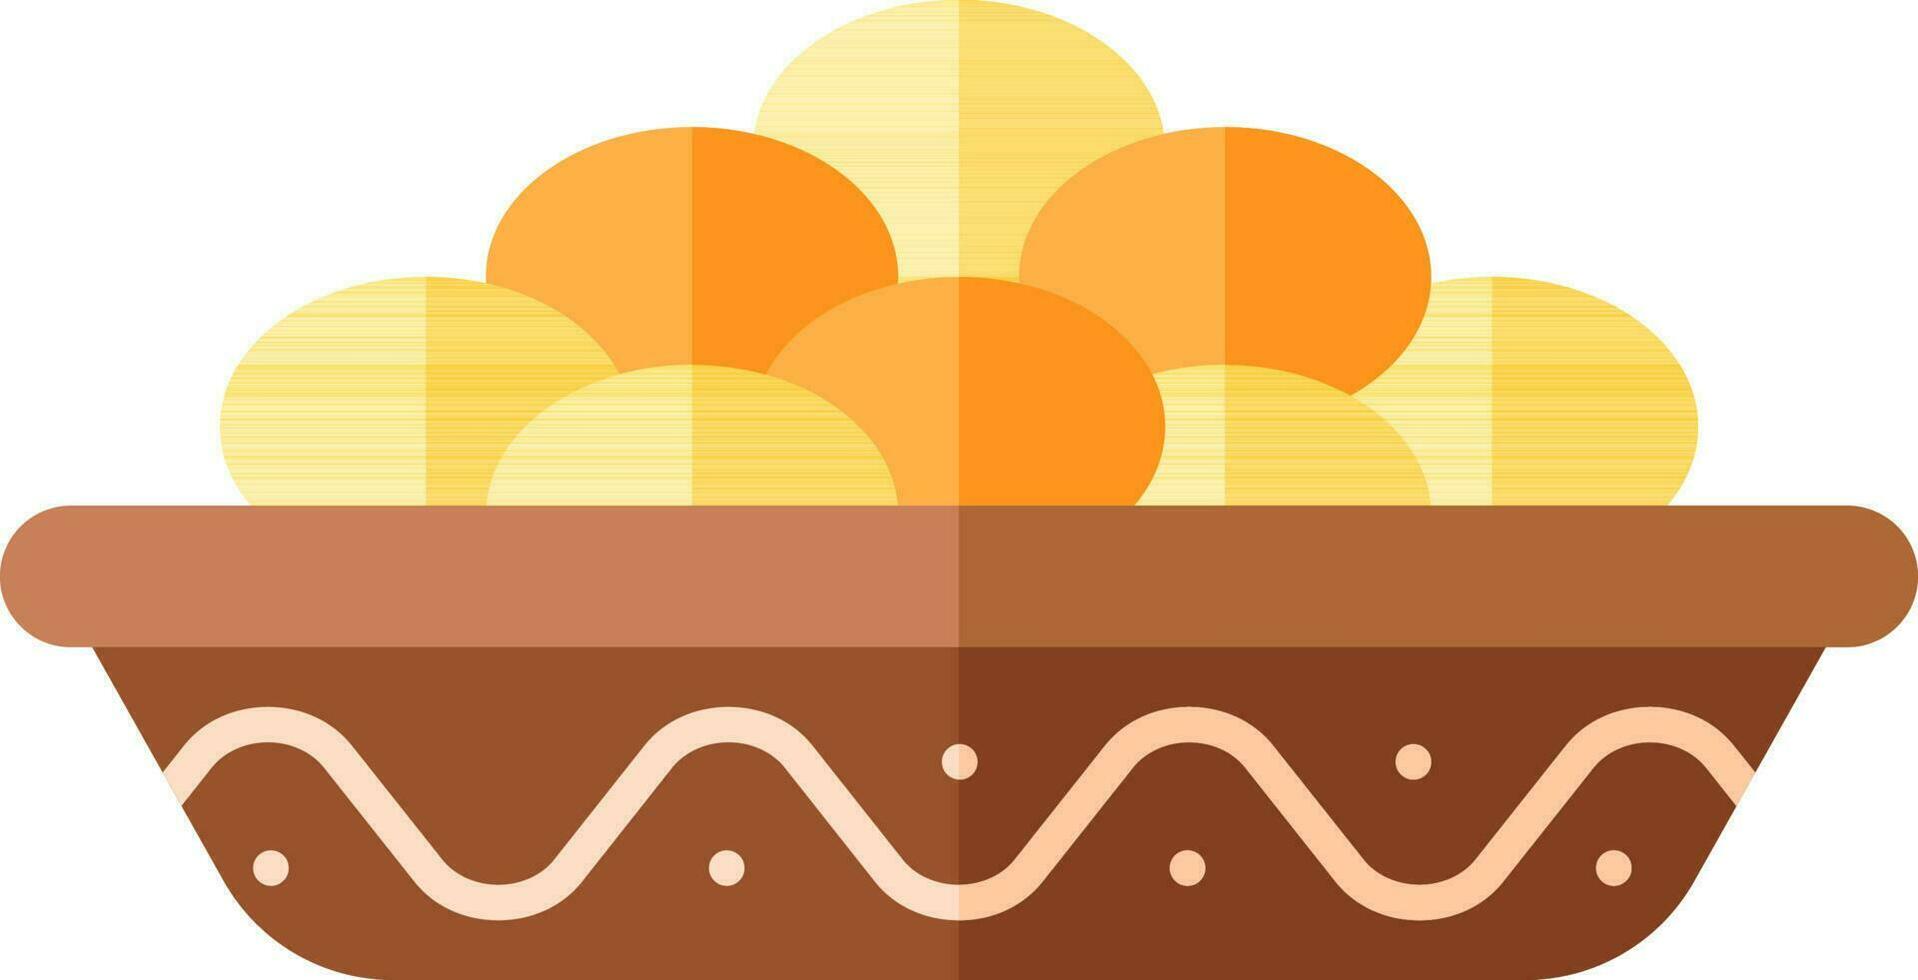 Indian Sweet Ladoo Bowl Icon In Yellow And Brown Color. vector